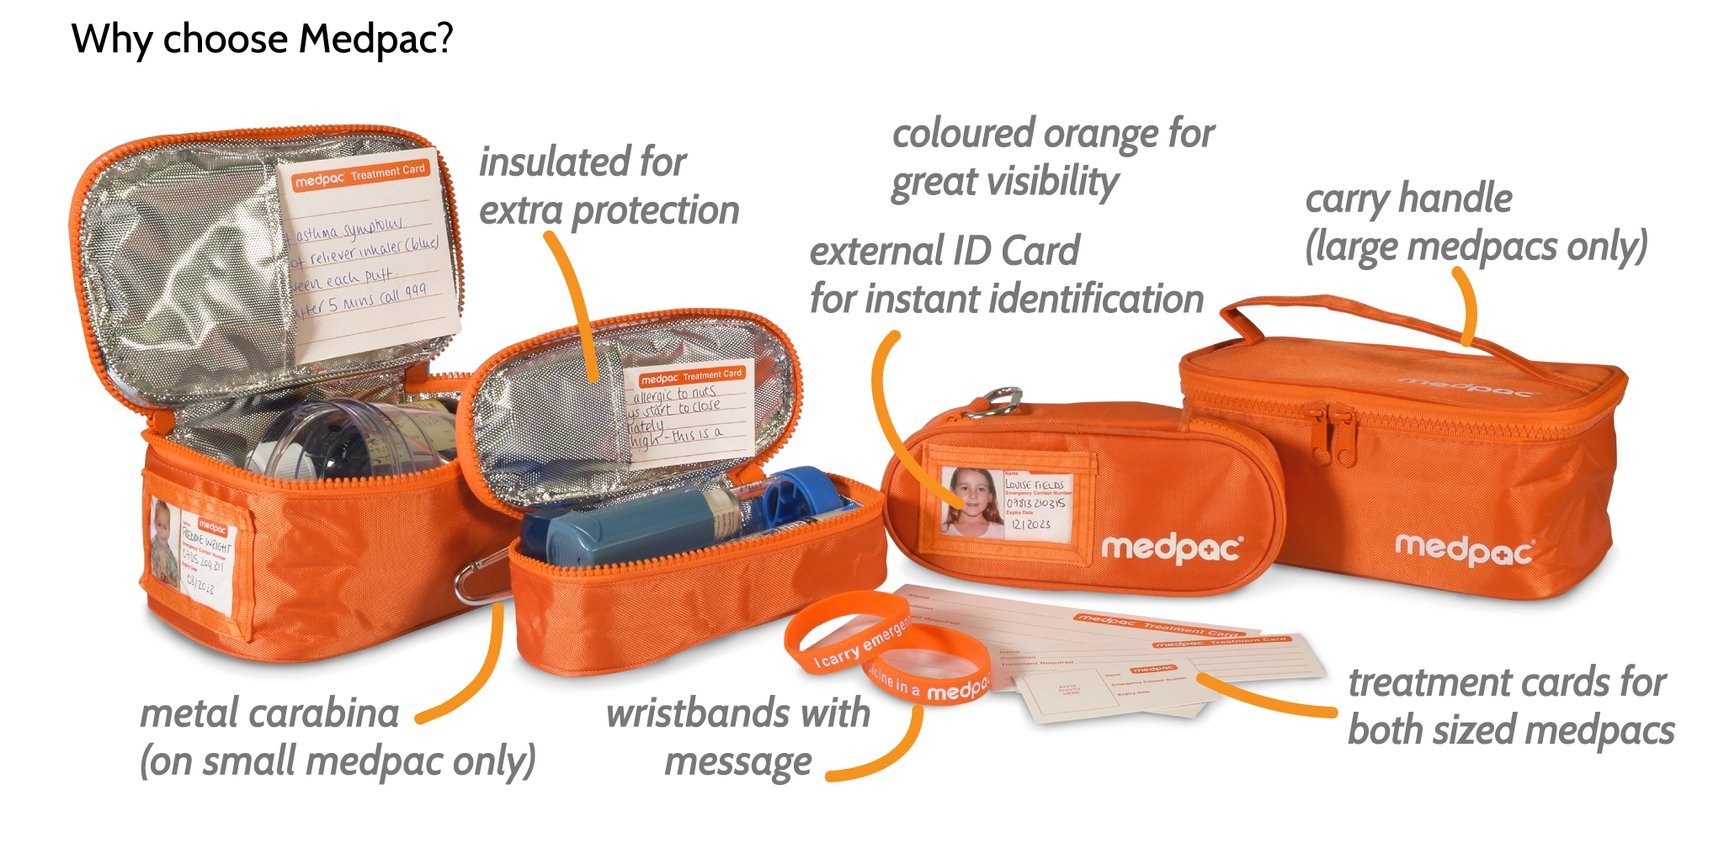 Henry Schein Medical and Medpod Inc. join forces to launch Medpac